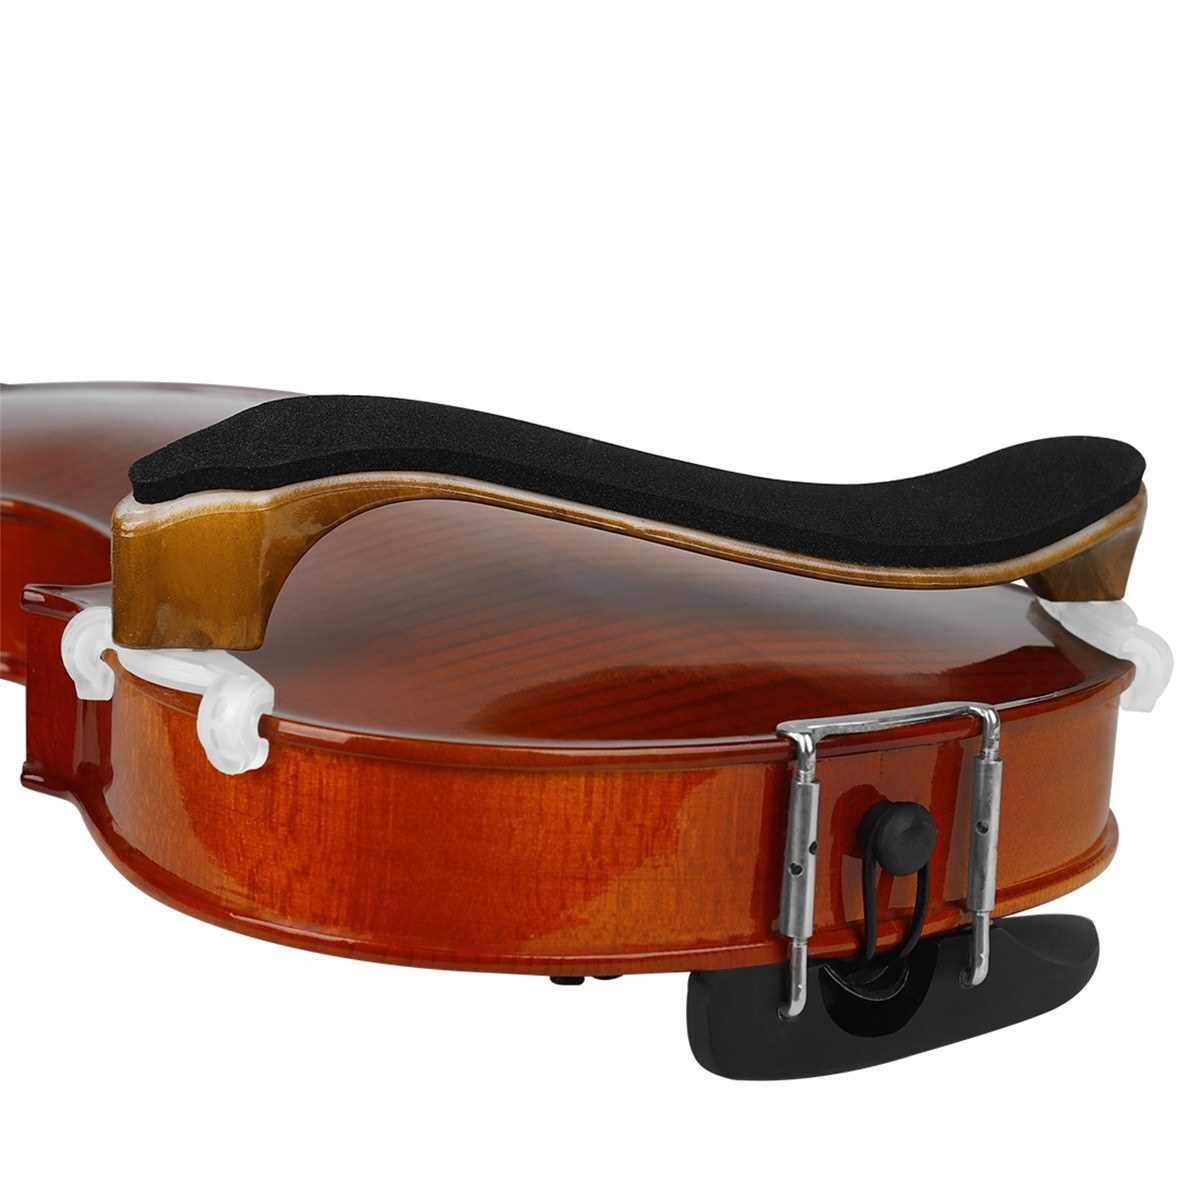 IRIN Violin Shoulder Rest for 4/4 and 3/4 Violins with Adjustable Feet Thick Foam Pad Suitable for Different Neck Lengths (Red)